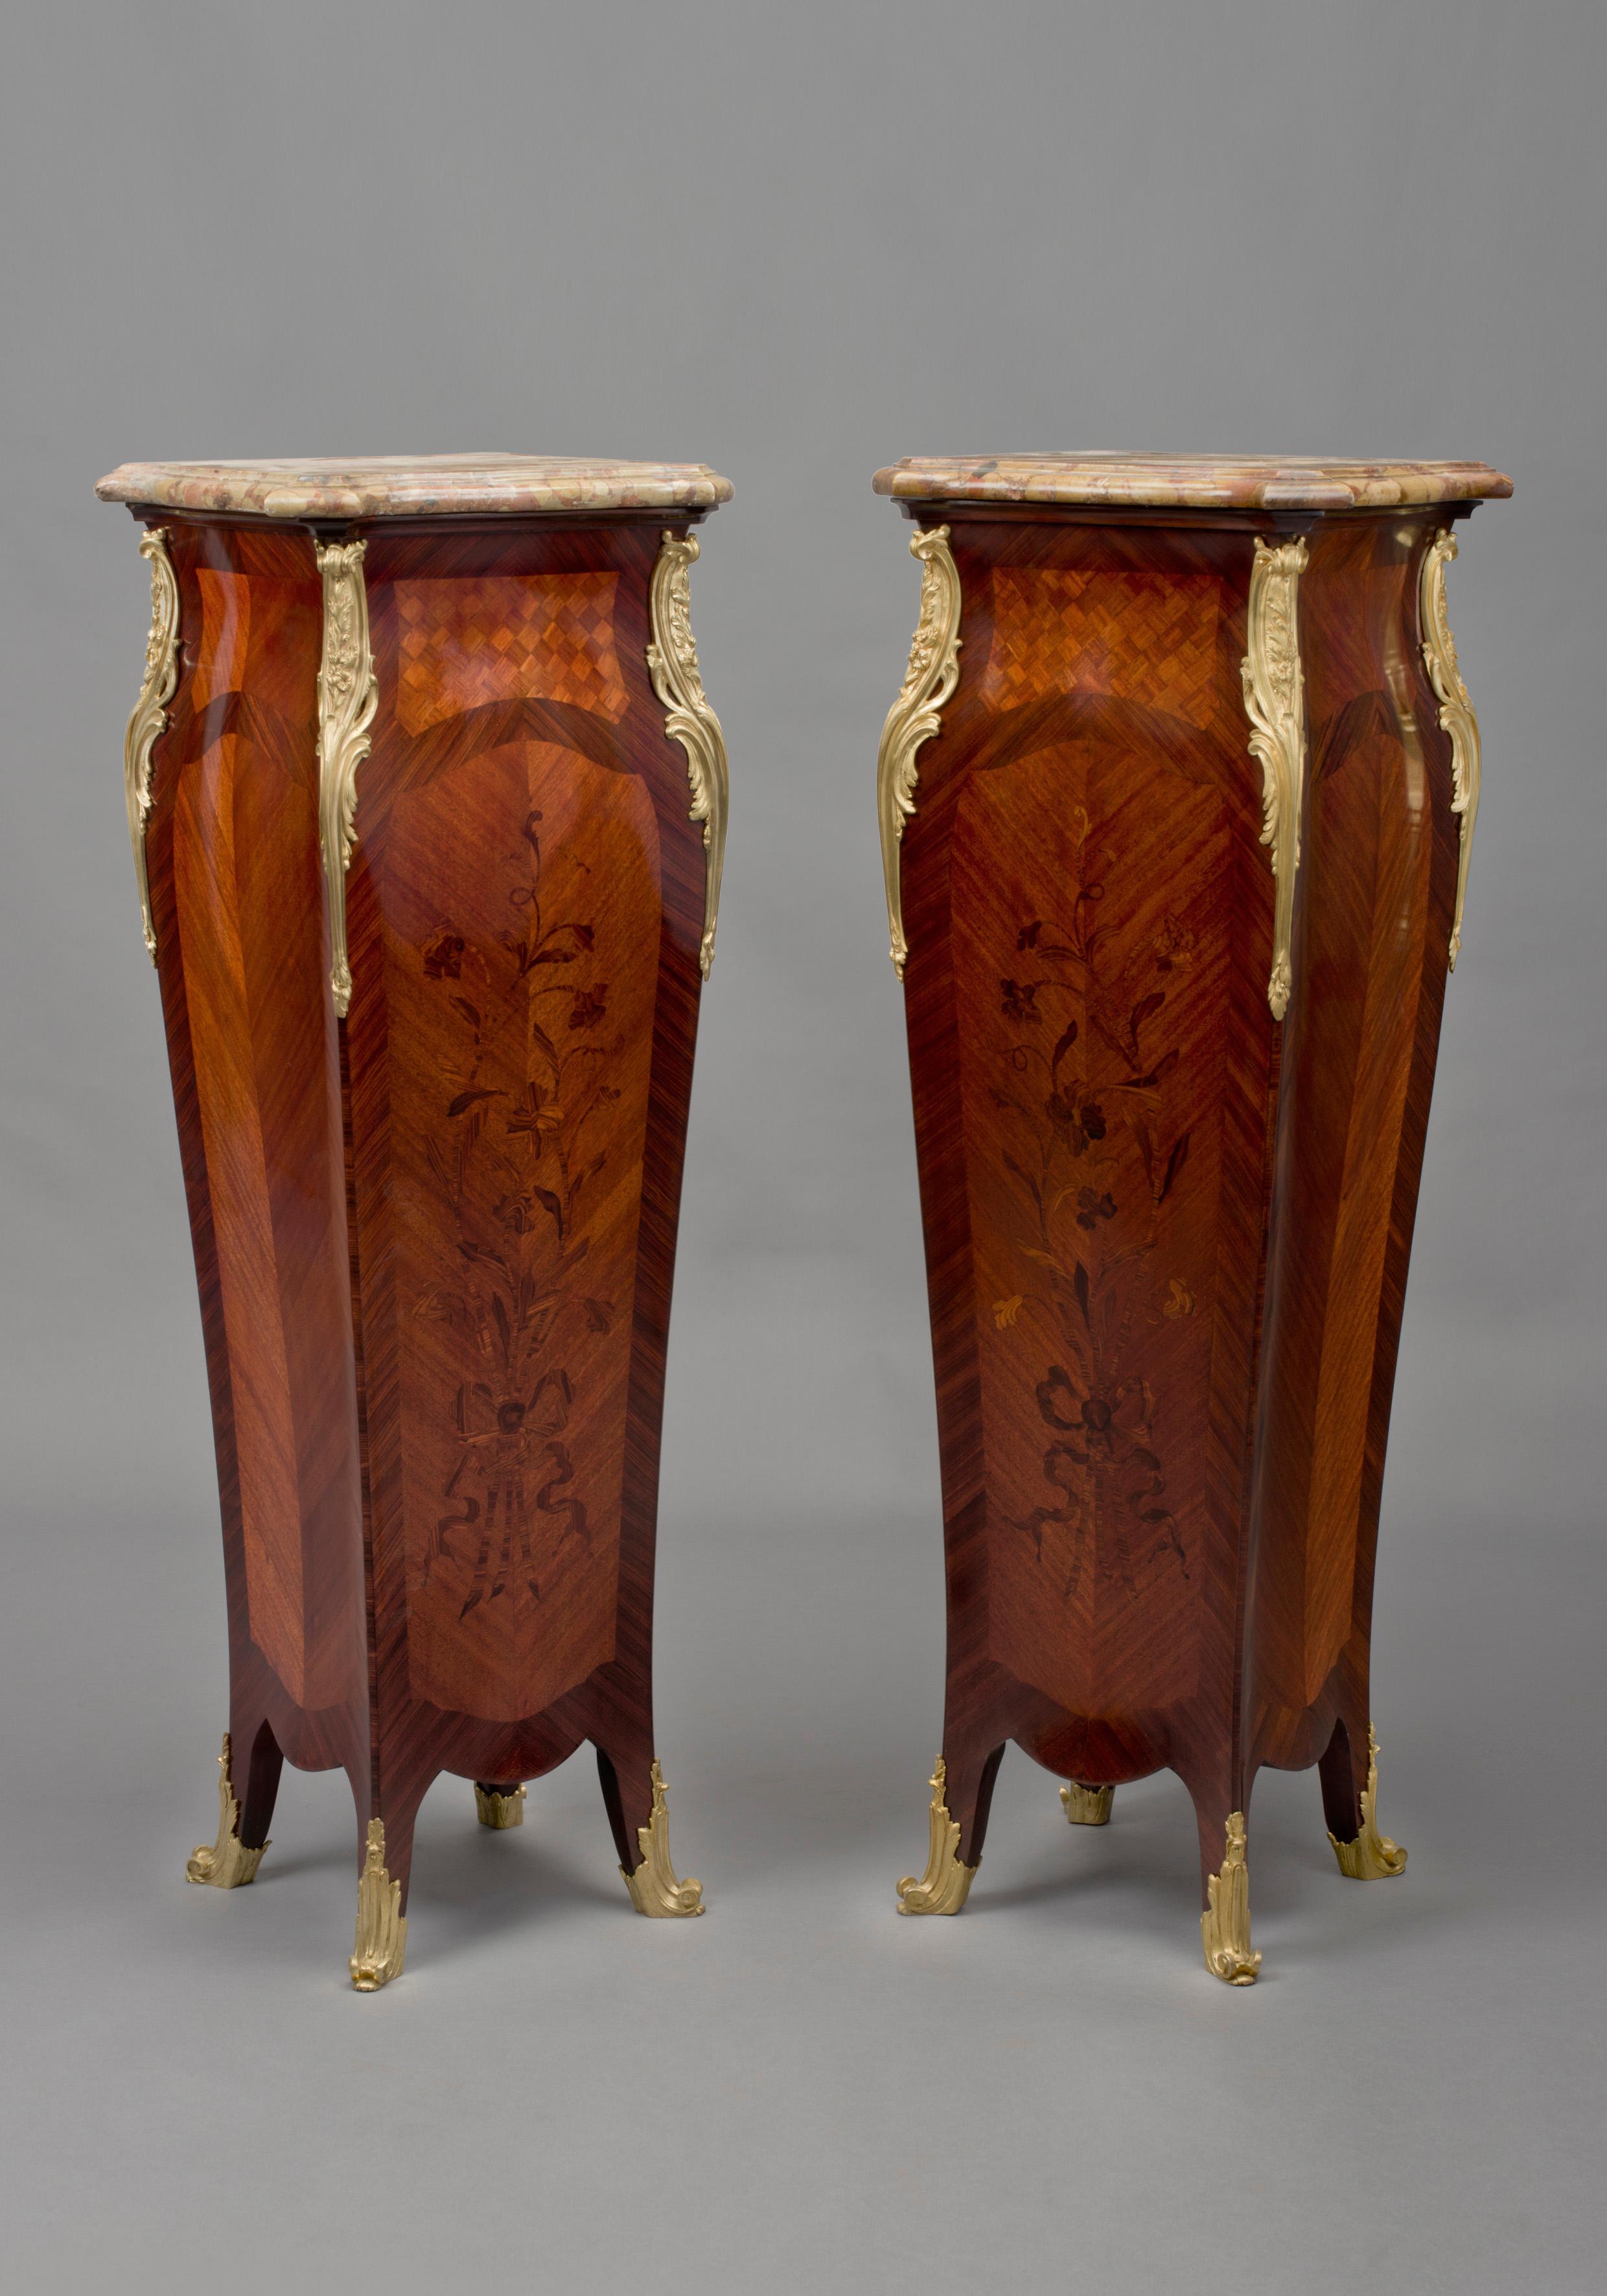 A very fine pair Of Louis XV style gilt bronze mounted marquetry inlaid pedestals, firmly attributed to Maison Millet.

French, circa 1880. 

This elegant pair of Louis XV style pedestals have shaped brèche d'Alep marble tops, above bombe shaped